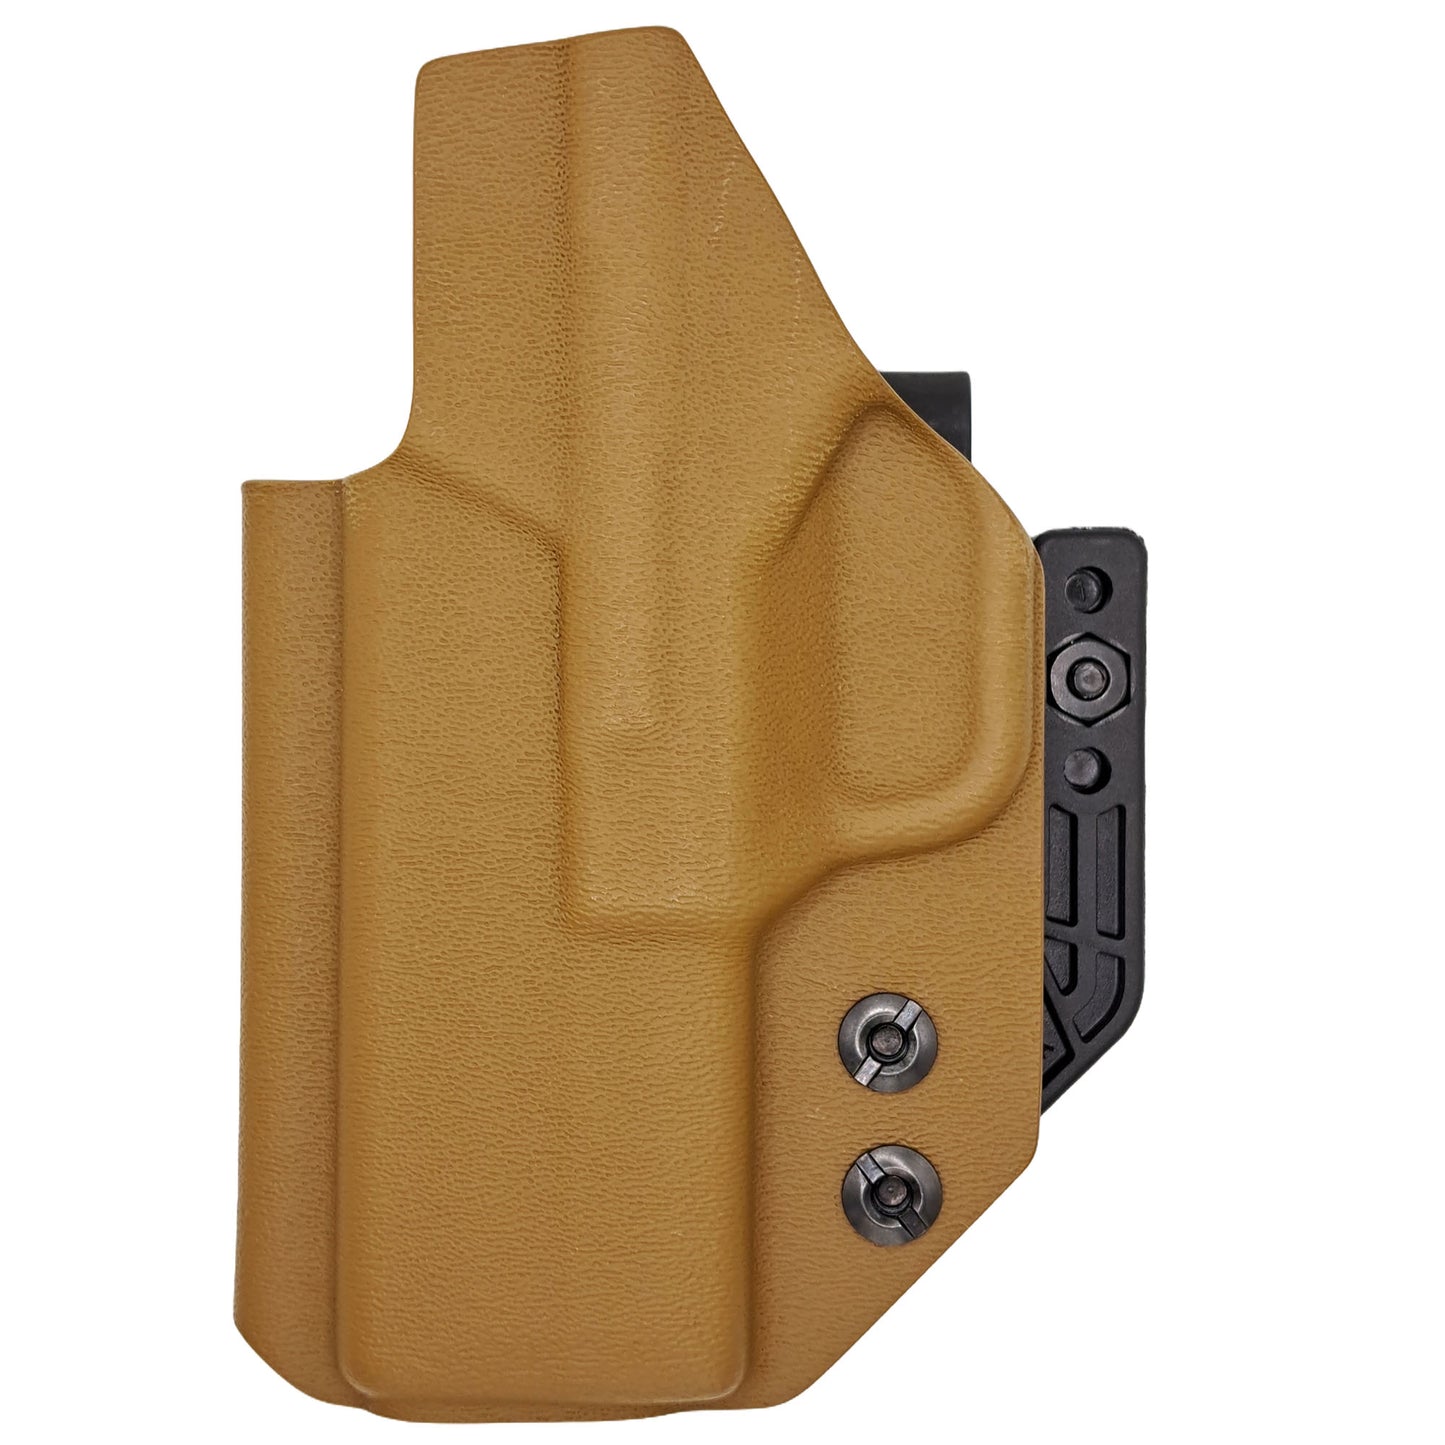 IWB TUCKABLE HOLSTER FOR SPRINGFIELD ARMORY HELLCAT PRO